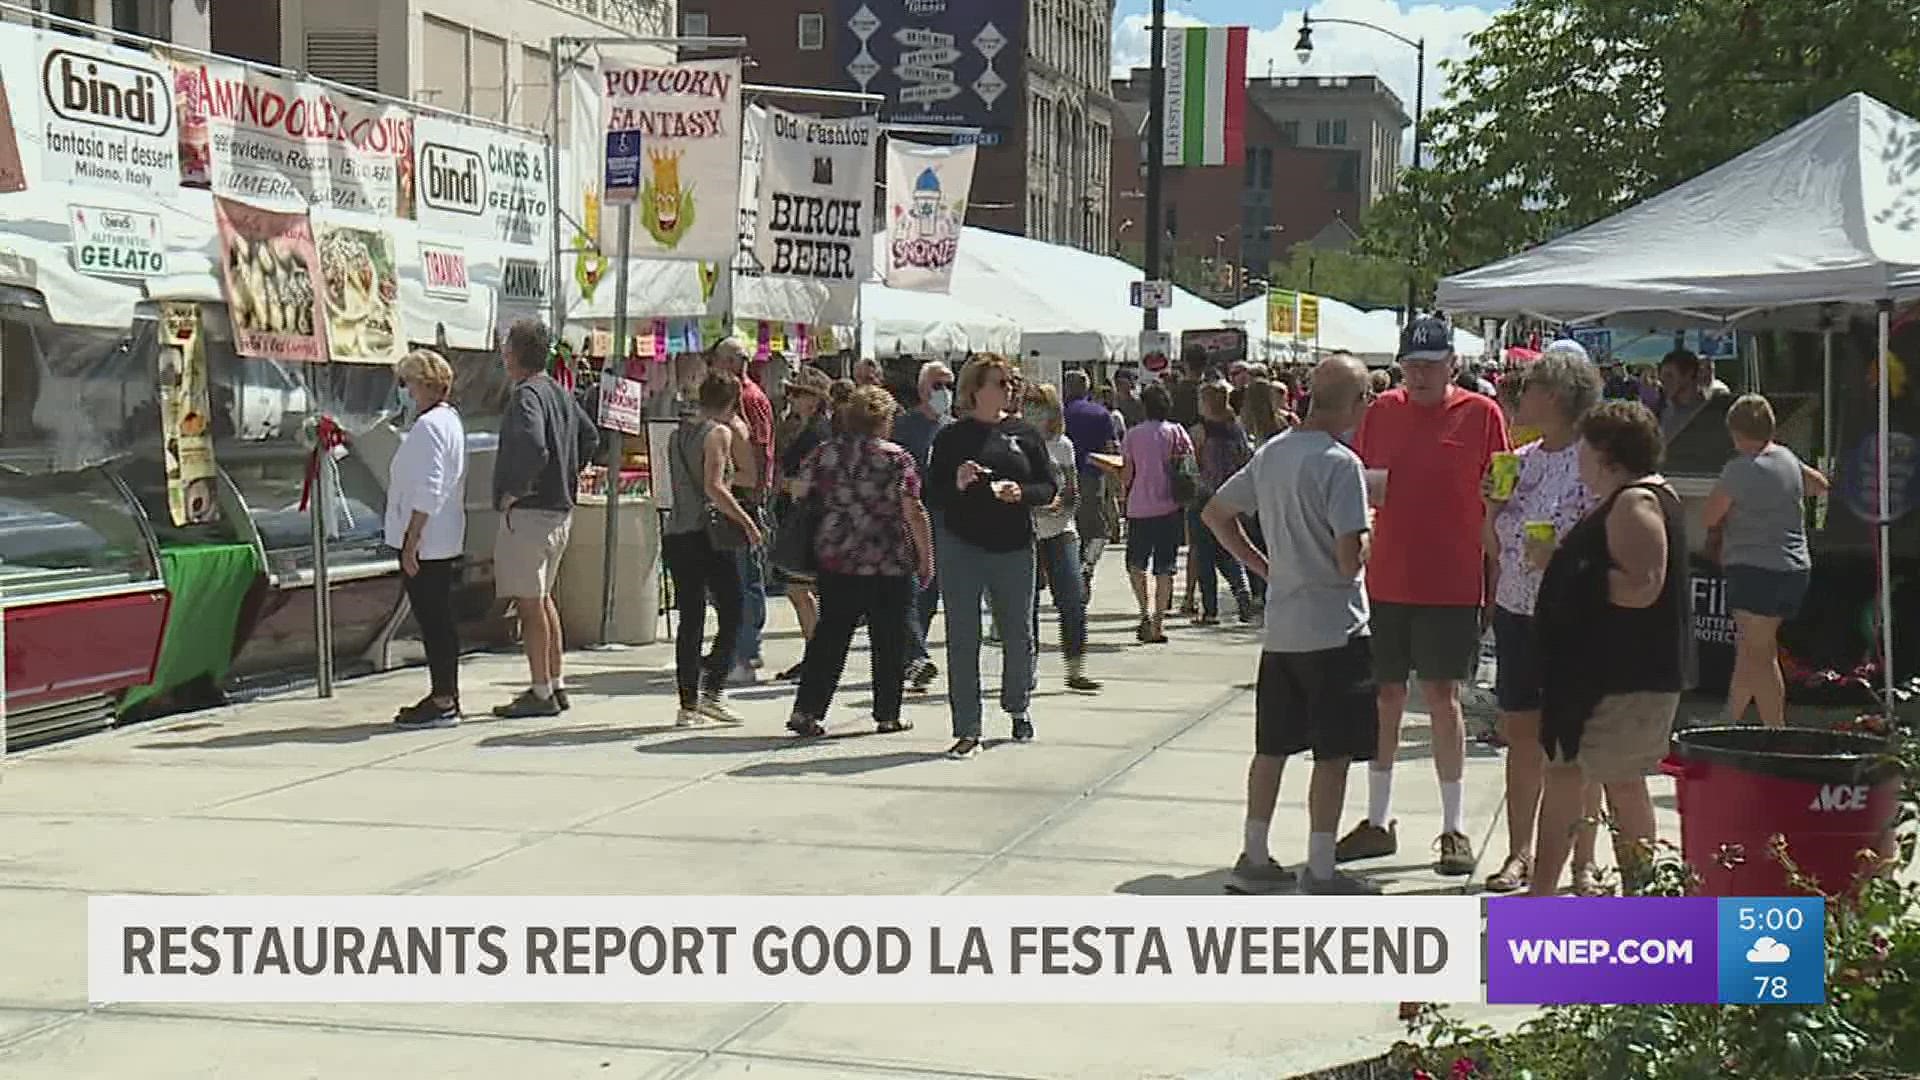 The annual food festival supports dozens of restaurants that were happy to see it return this year after the year they've had.